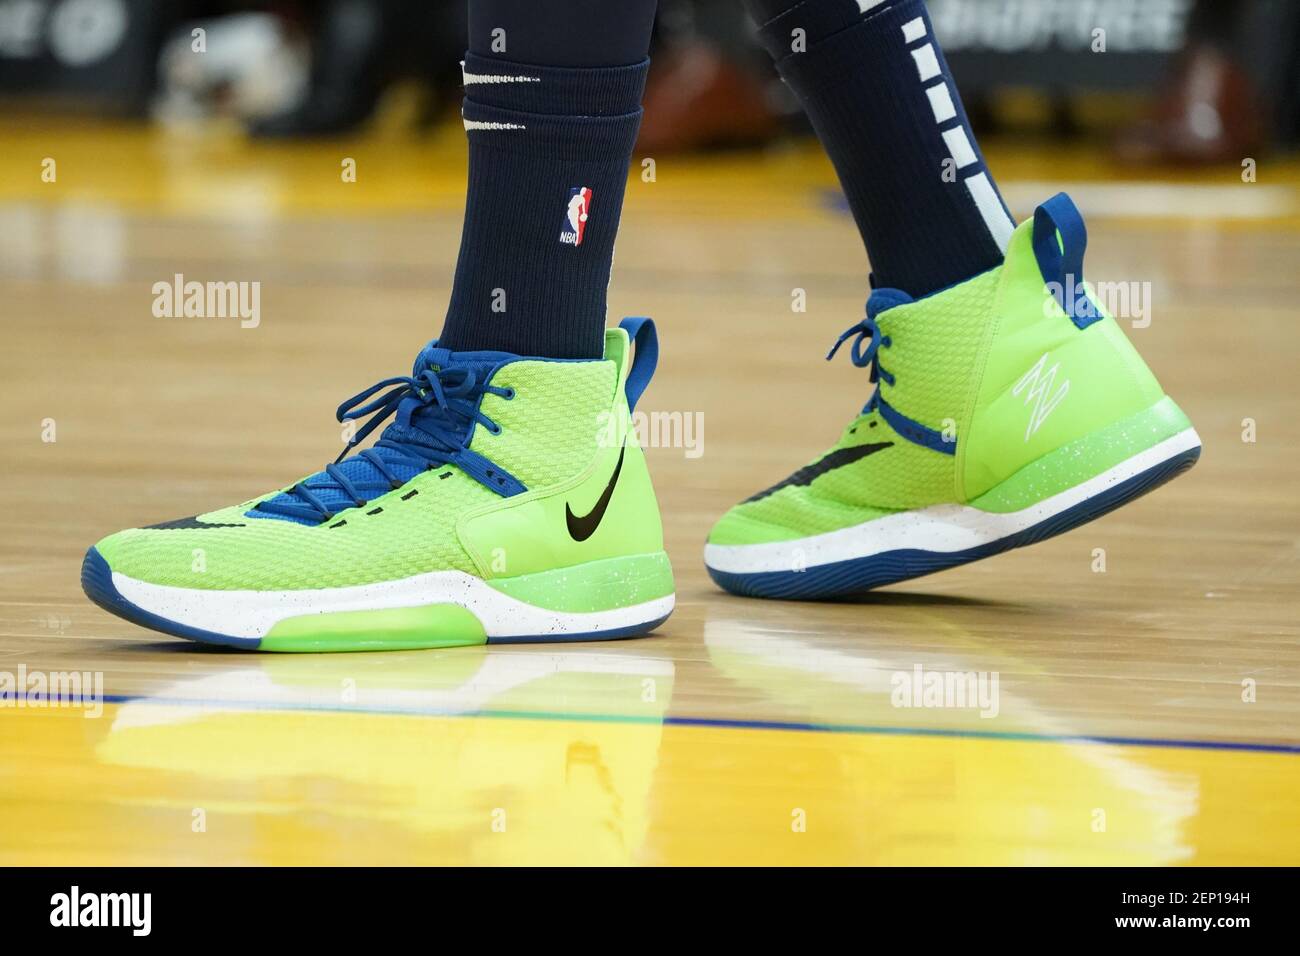 October 10, 2019; San Francisco, CA, USA; Detail view of the Nike shoes  worn by Minnesota Timberwolves center Karl-Anthony Towns (32) during the  first quarter against the Golden State Warriors at Chase